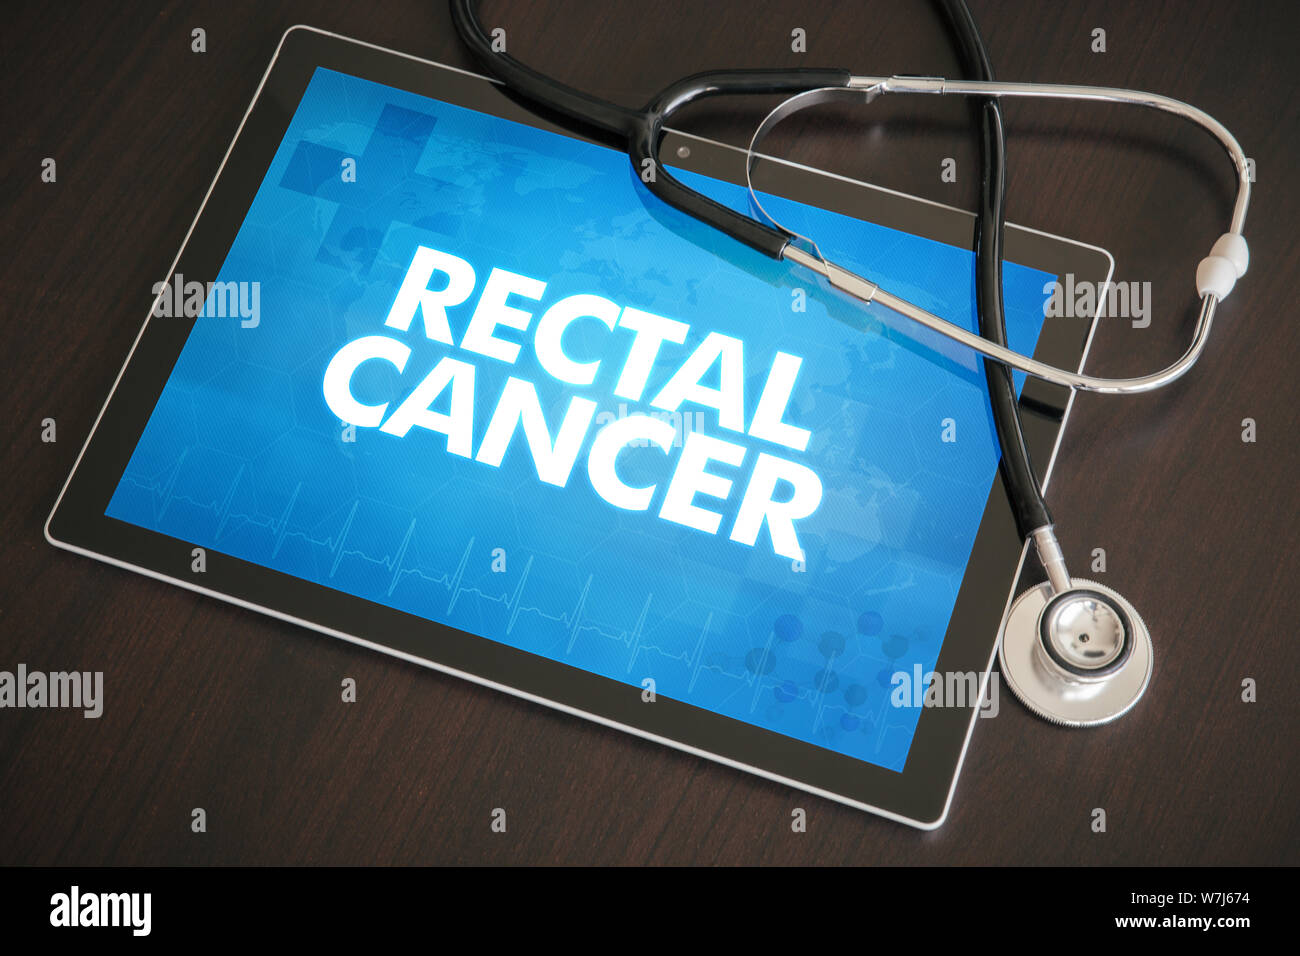 Rectal cancer (cancer type) diagnosis medical concept on tablet screen with stethoscope. Stock Photo